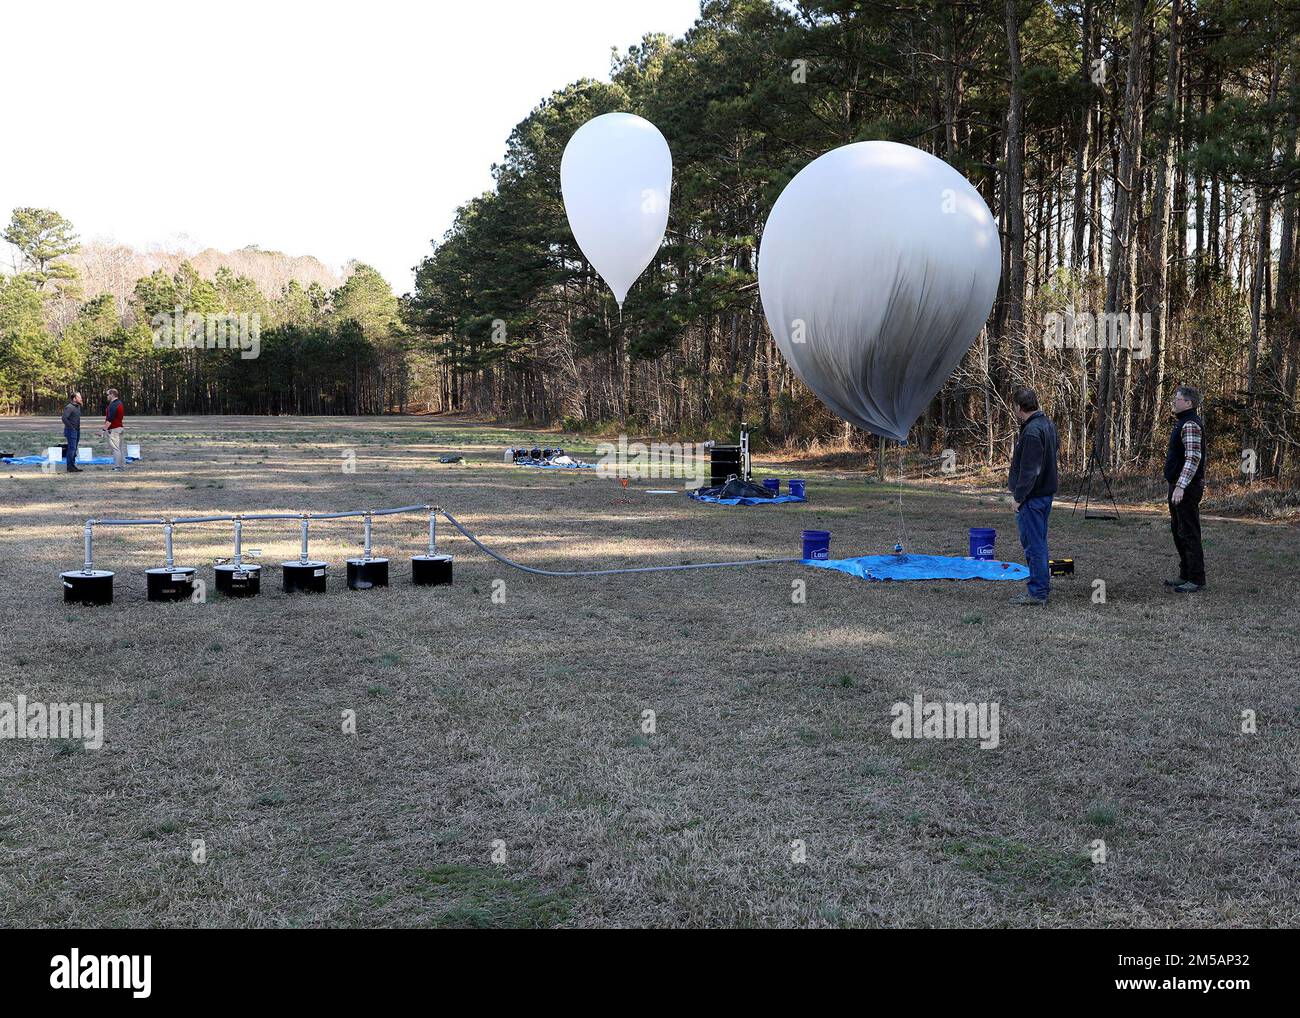 Joint Expeditionary Base Little Creek-Fort Story, Virginia (Feb. 23, 2022) Representatives and science advisors from the Office of Naval Research, along with personnel from Navy Expeditionary Combat Command, conduct a rapid hydrogen production evolution as part of a science and technology demonstration.  The collaborative effort utilized the hydrogen production for a balloon lift in support of communications relay capability.  The demonstration was part of an ongoing relationship between the two organizations to explore ideas, technologies, and concepts which have potential application within Stock Photo